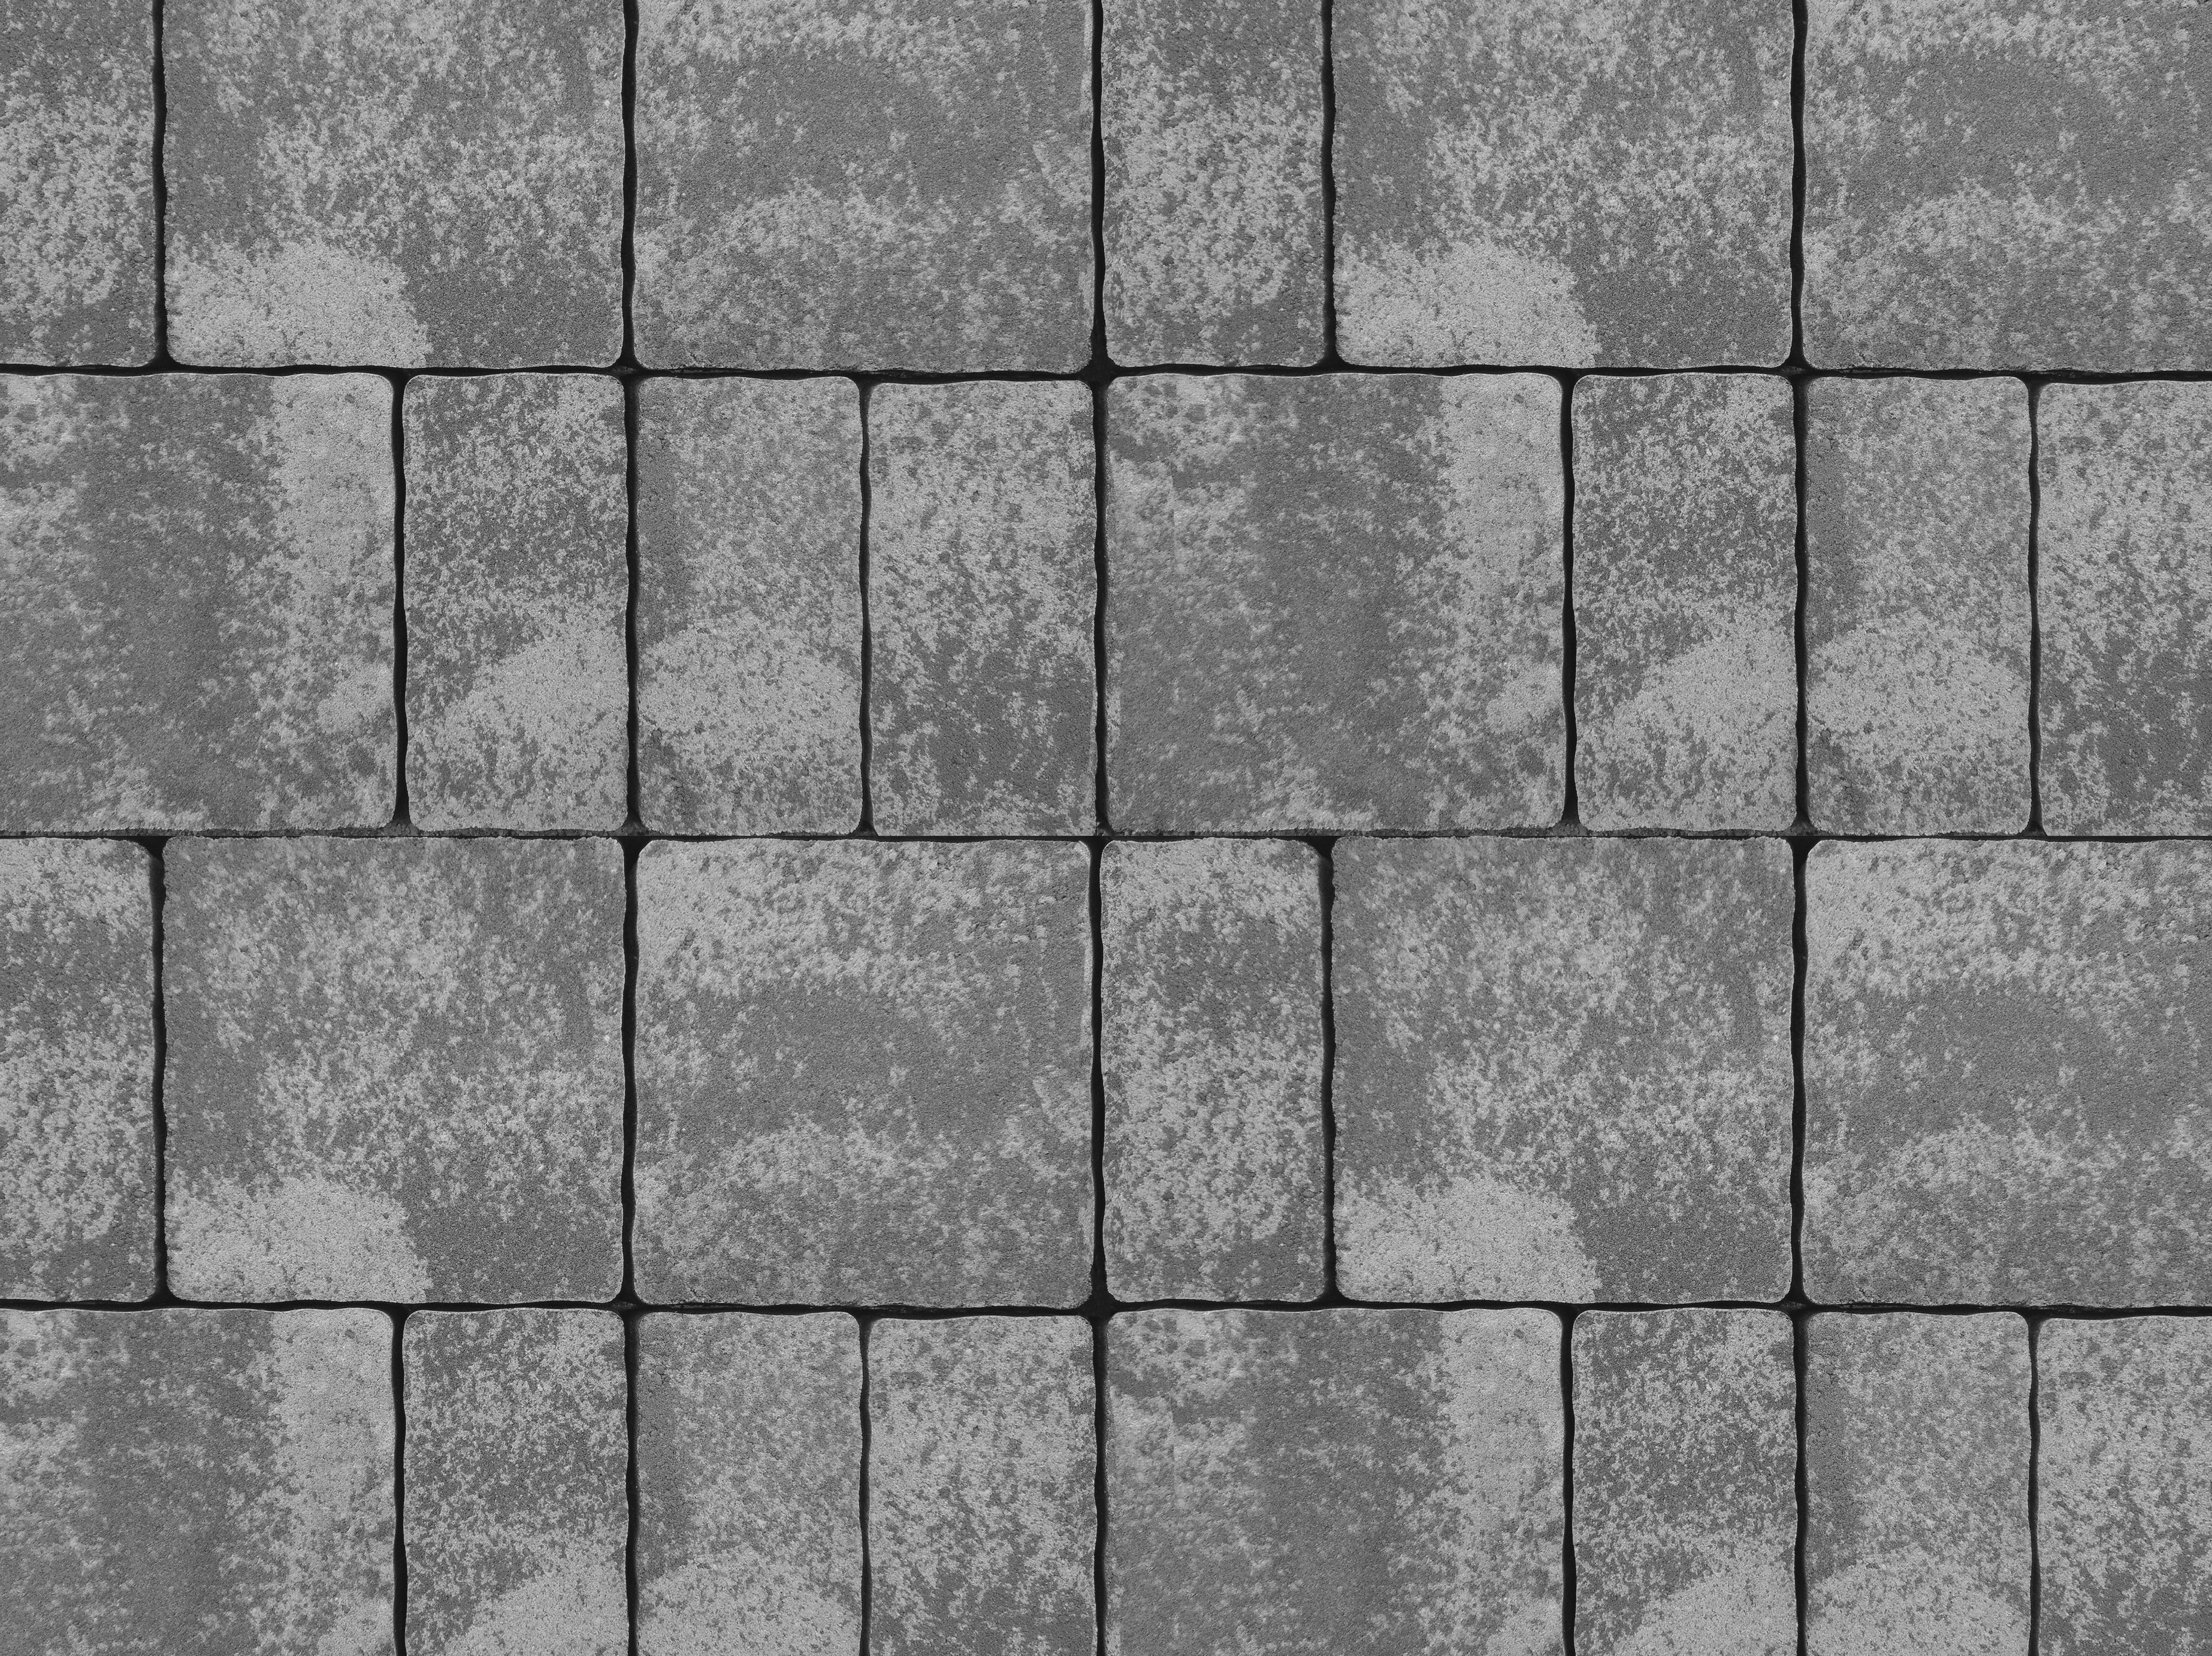 discover textures | Square And Rectangular Gray Paving ...